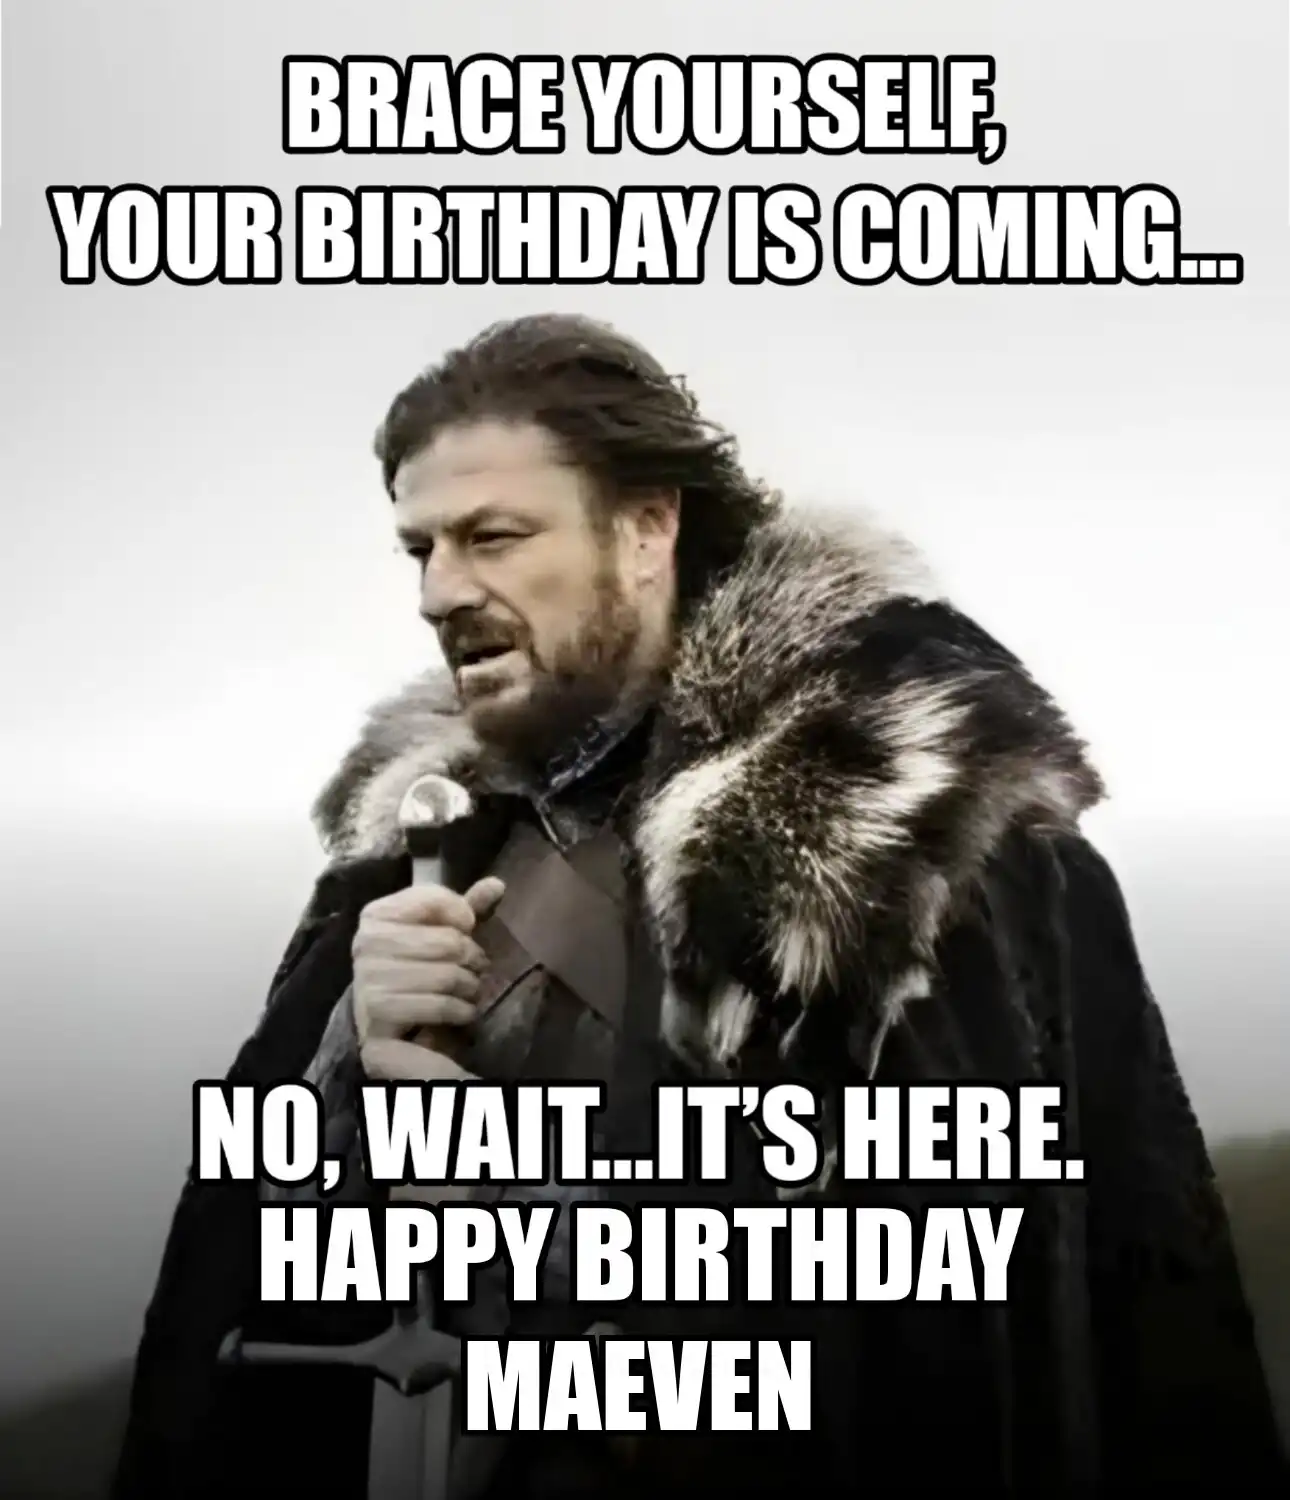 Happy Birthday Maeven Brace Yourself Your Birthday Is Coming Meme